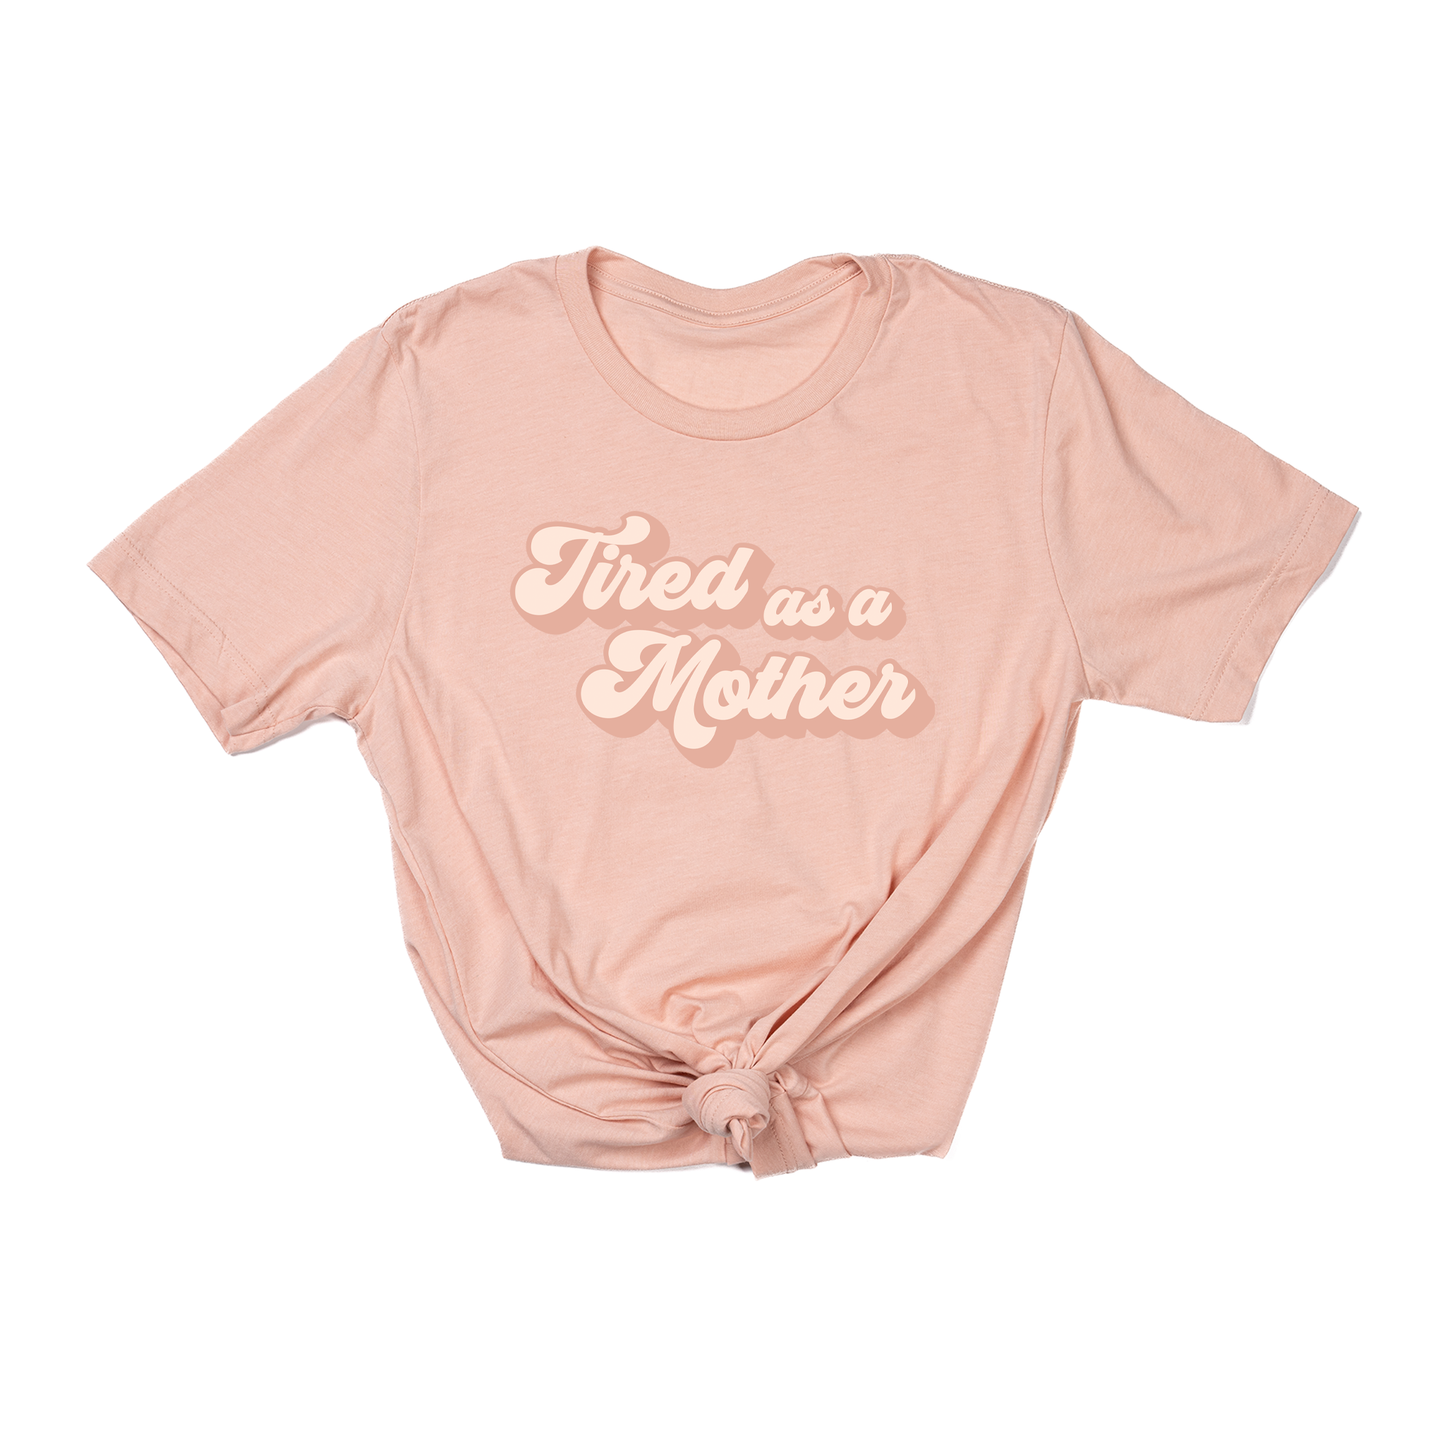 Tired as a Mother (Across Front) - Tee (Peach)